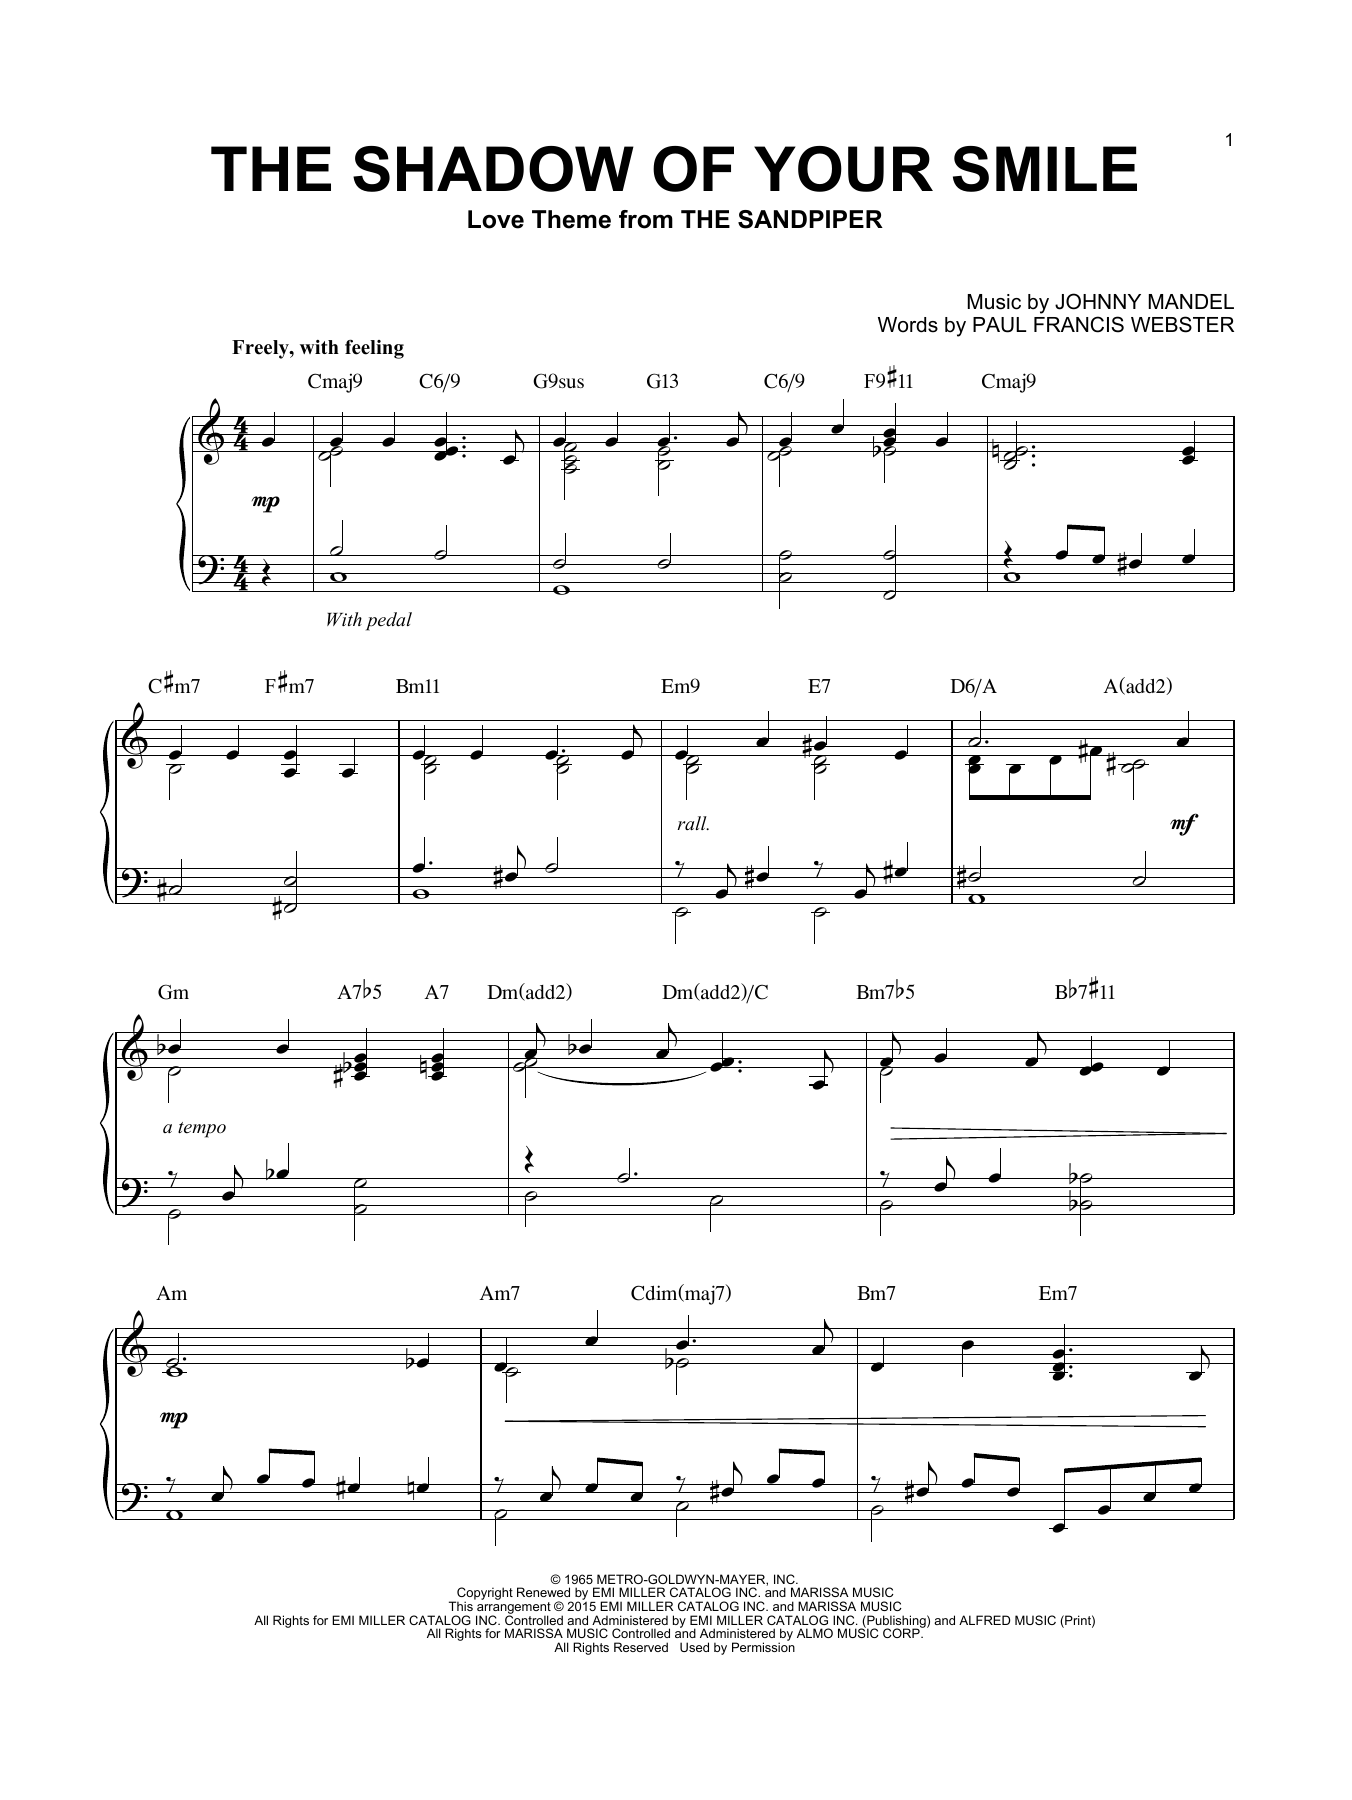 Download Johnny Mandel The Shadow Of Your Smile [Jazz version] Sheet Music